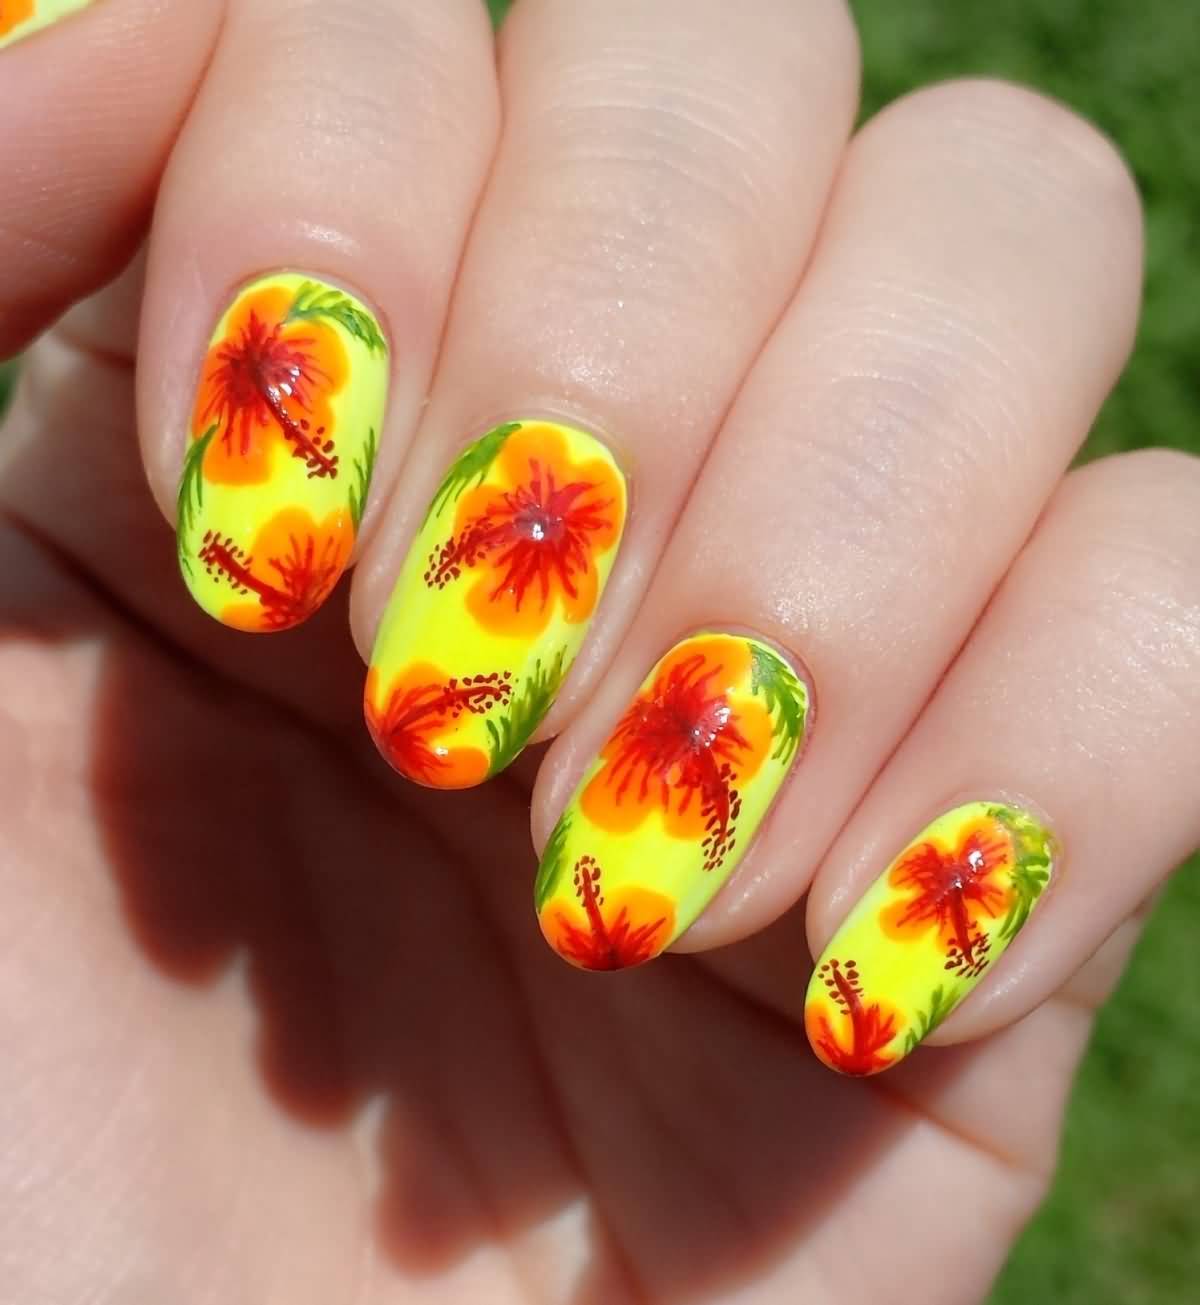 Neon Nails With Spring Flowers Nail Art Design